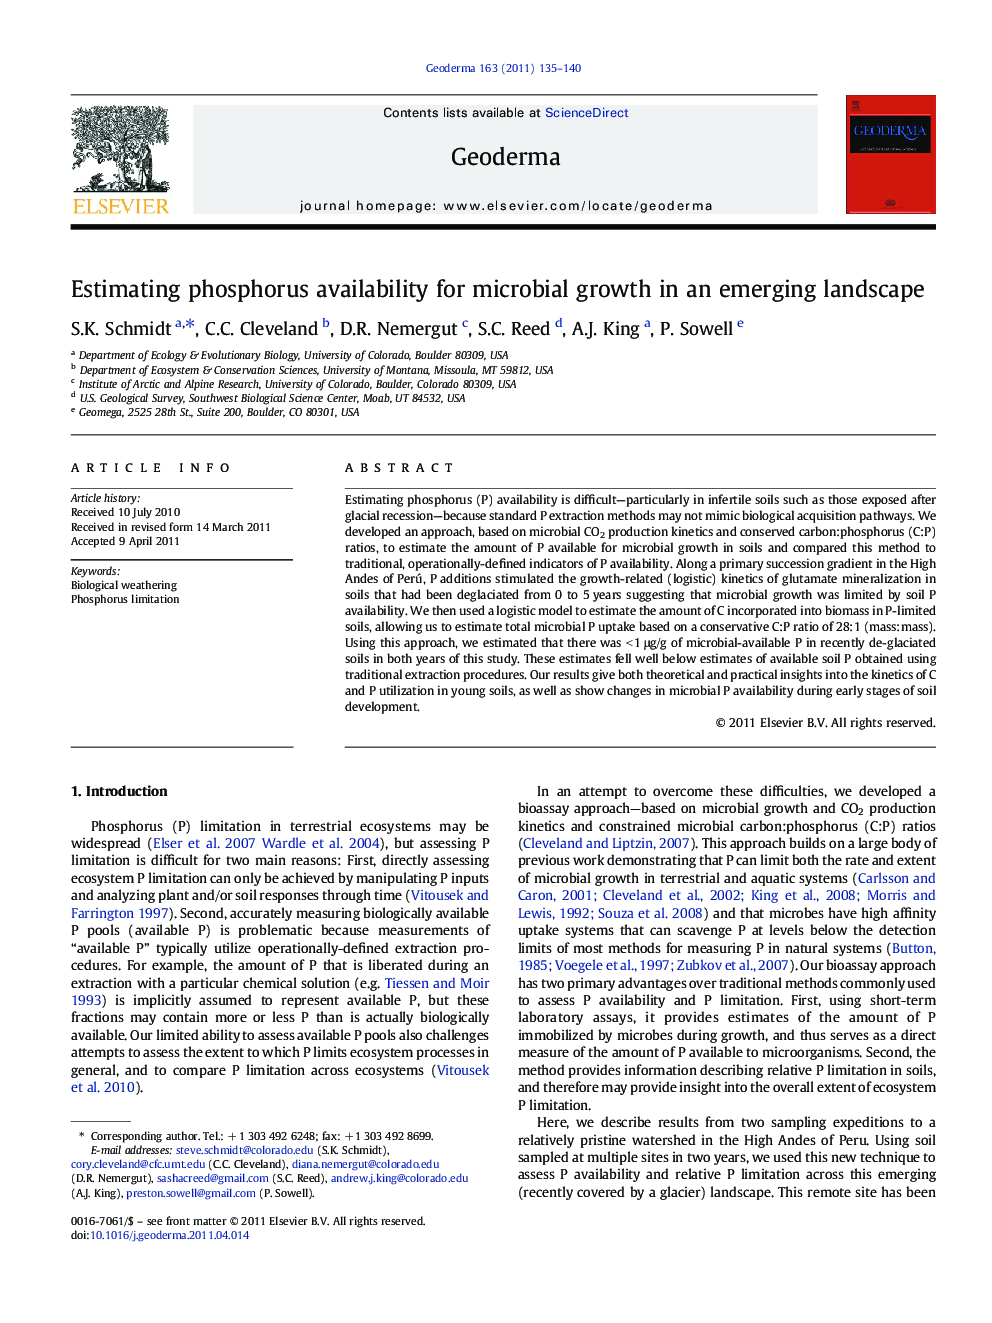 Estimating phosphorus availability for microbial growth in an emerging landscape